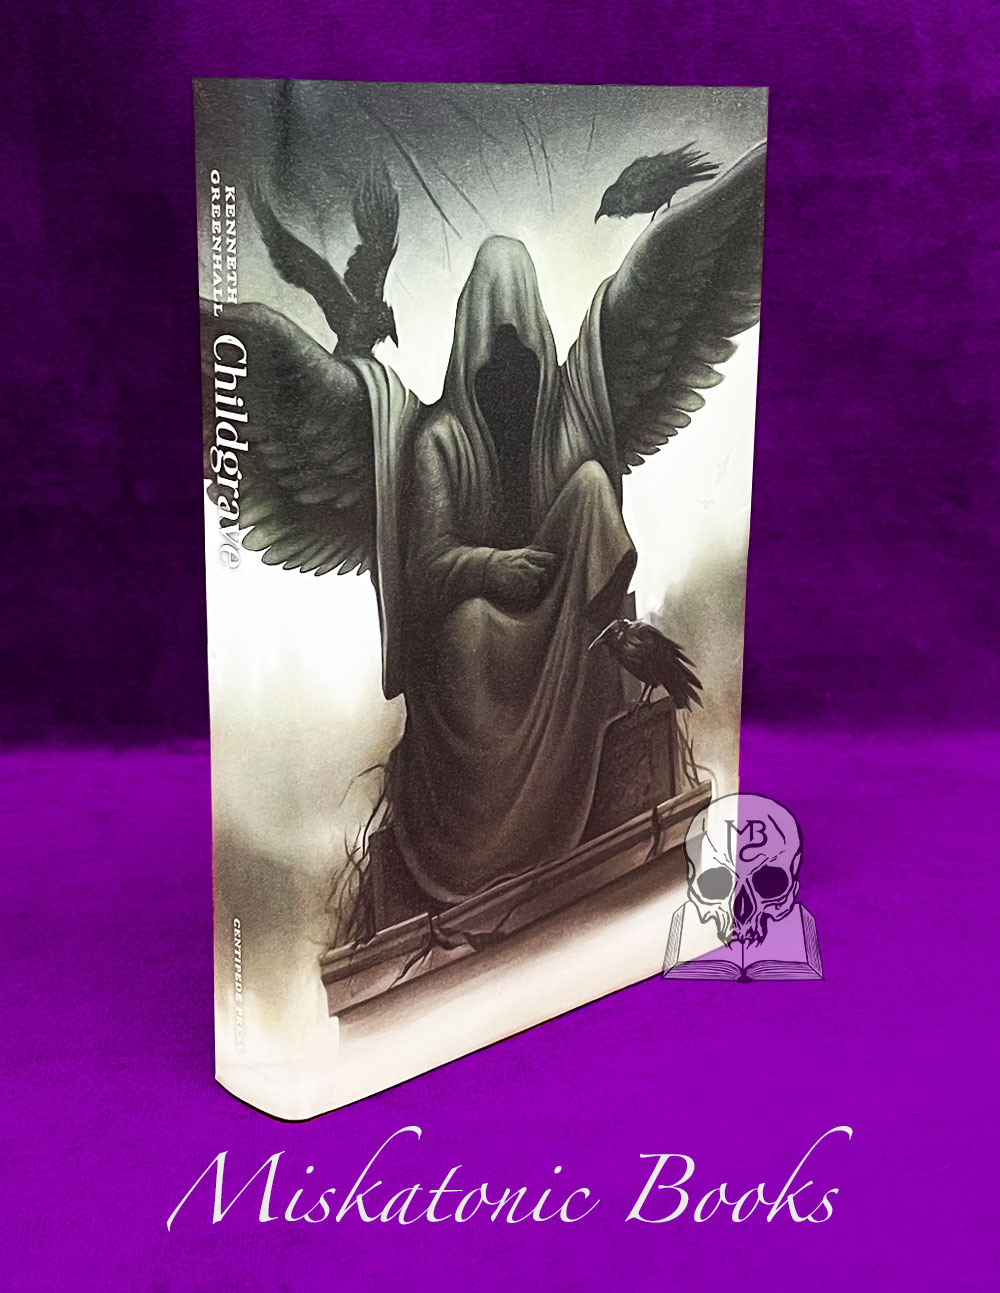 CHILDGRAVE by Ken Greenhall - Hardcover Edition